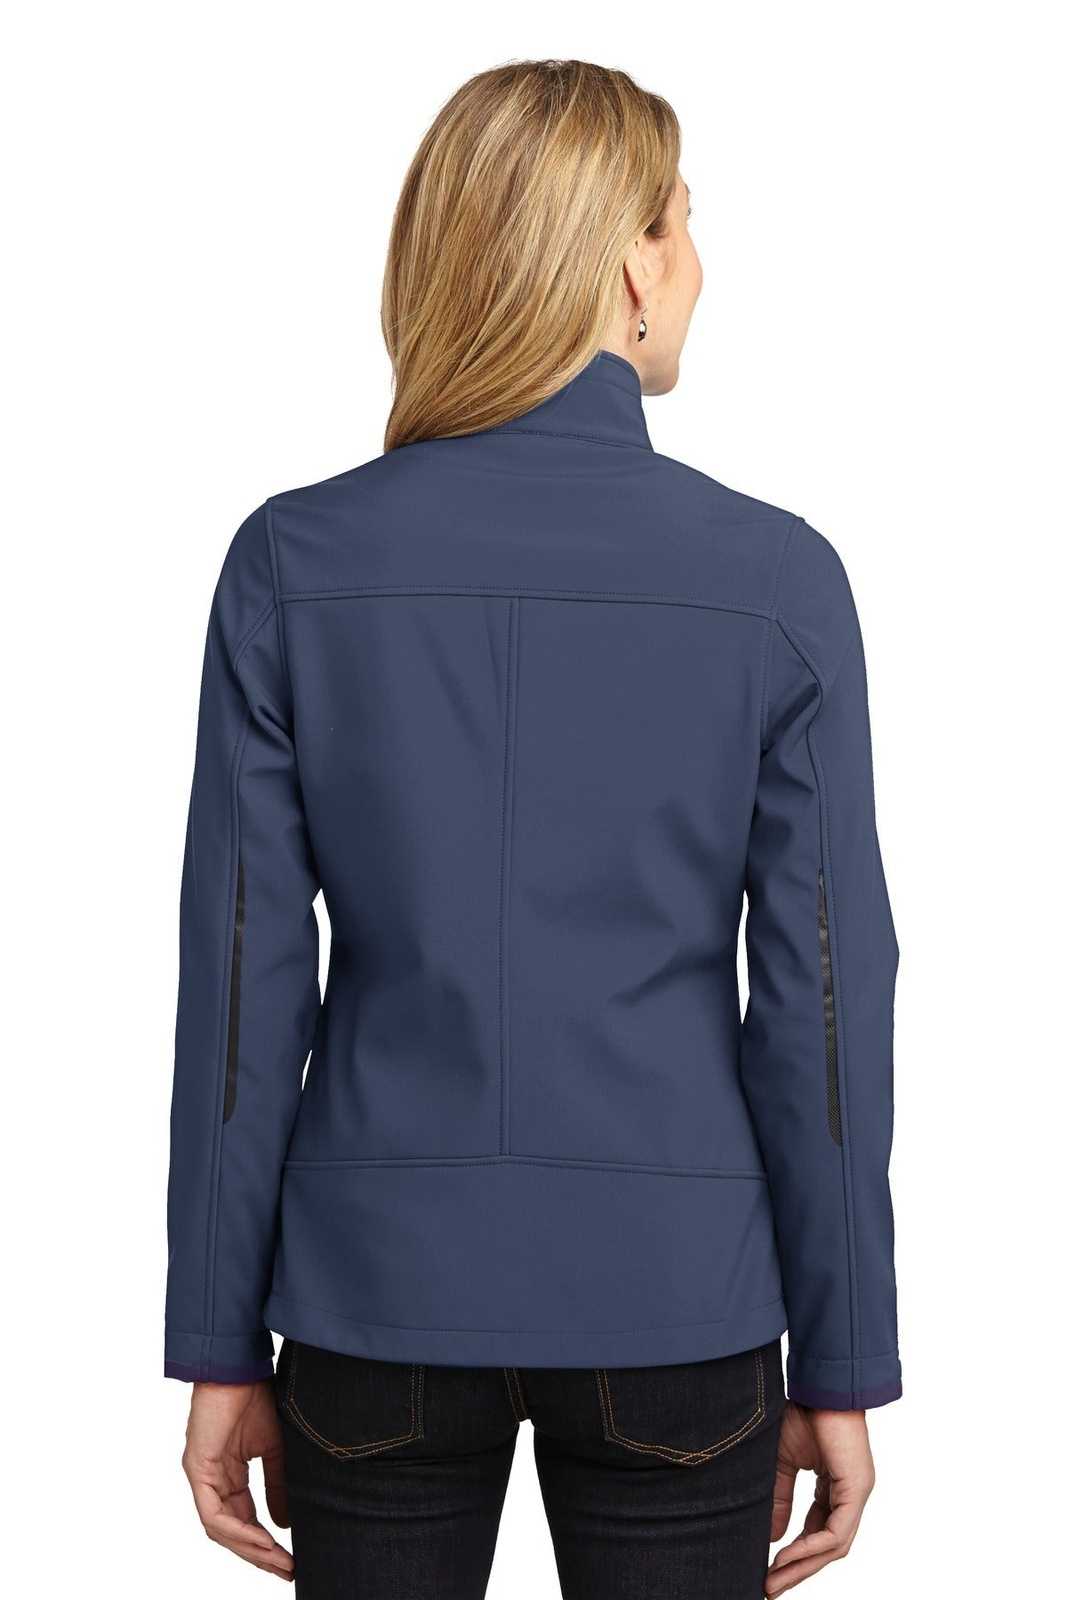 Port Authority L324 Ladies Welded Soft Shell Jacket - Dress Blue Navy - HIT a Double - 1